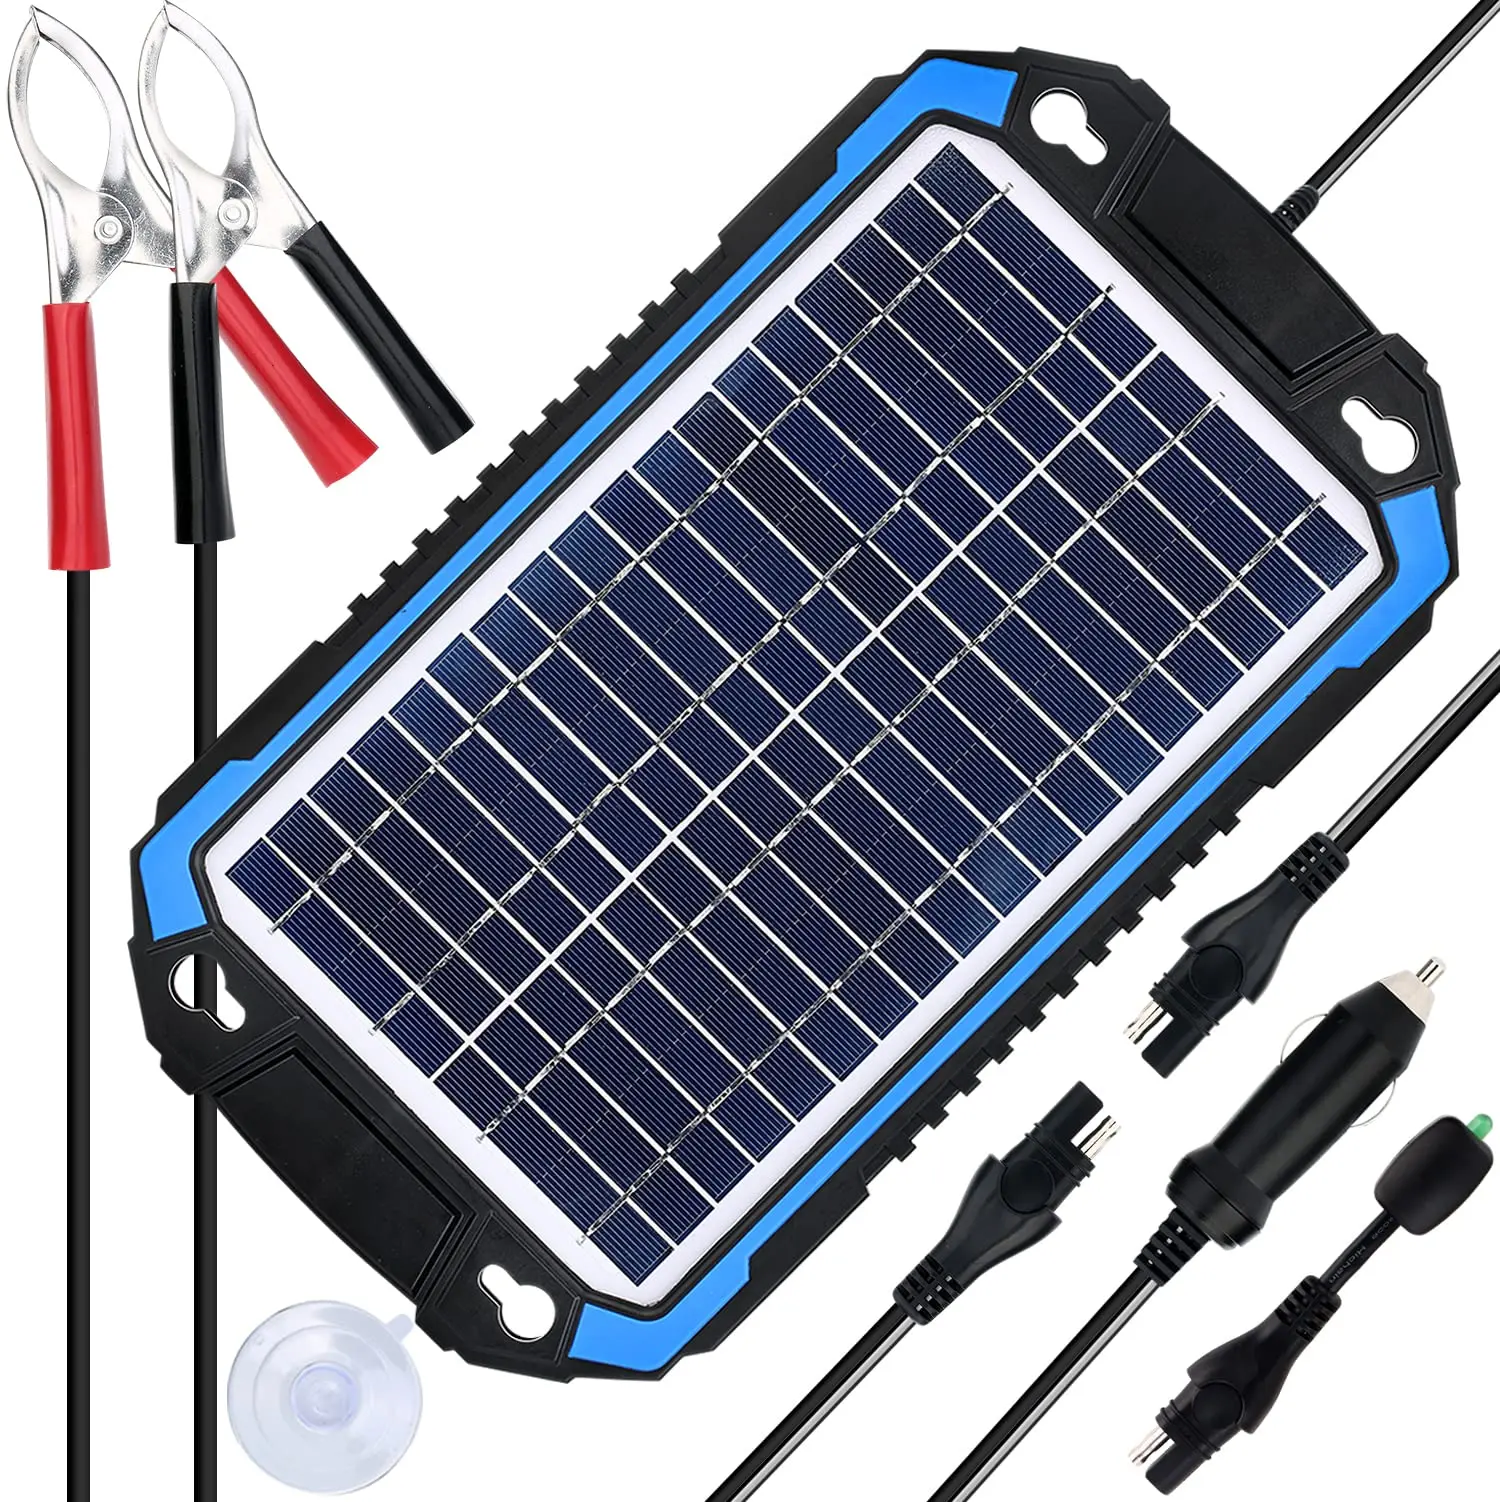 solar panel trickle charger - Can I leave a solar trickle charger on all the time